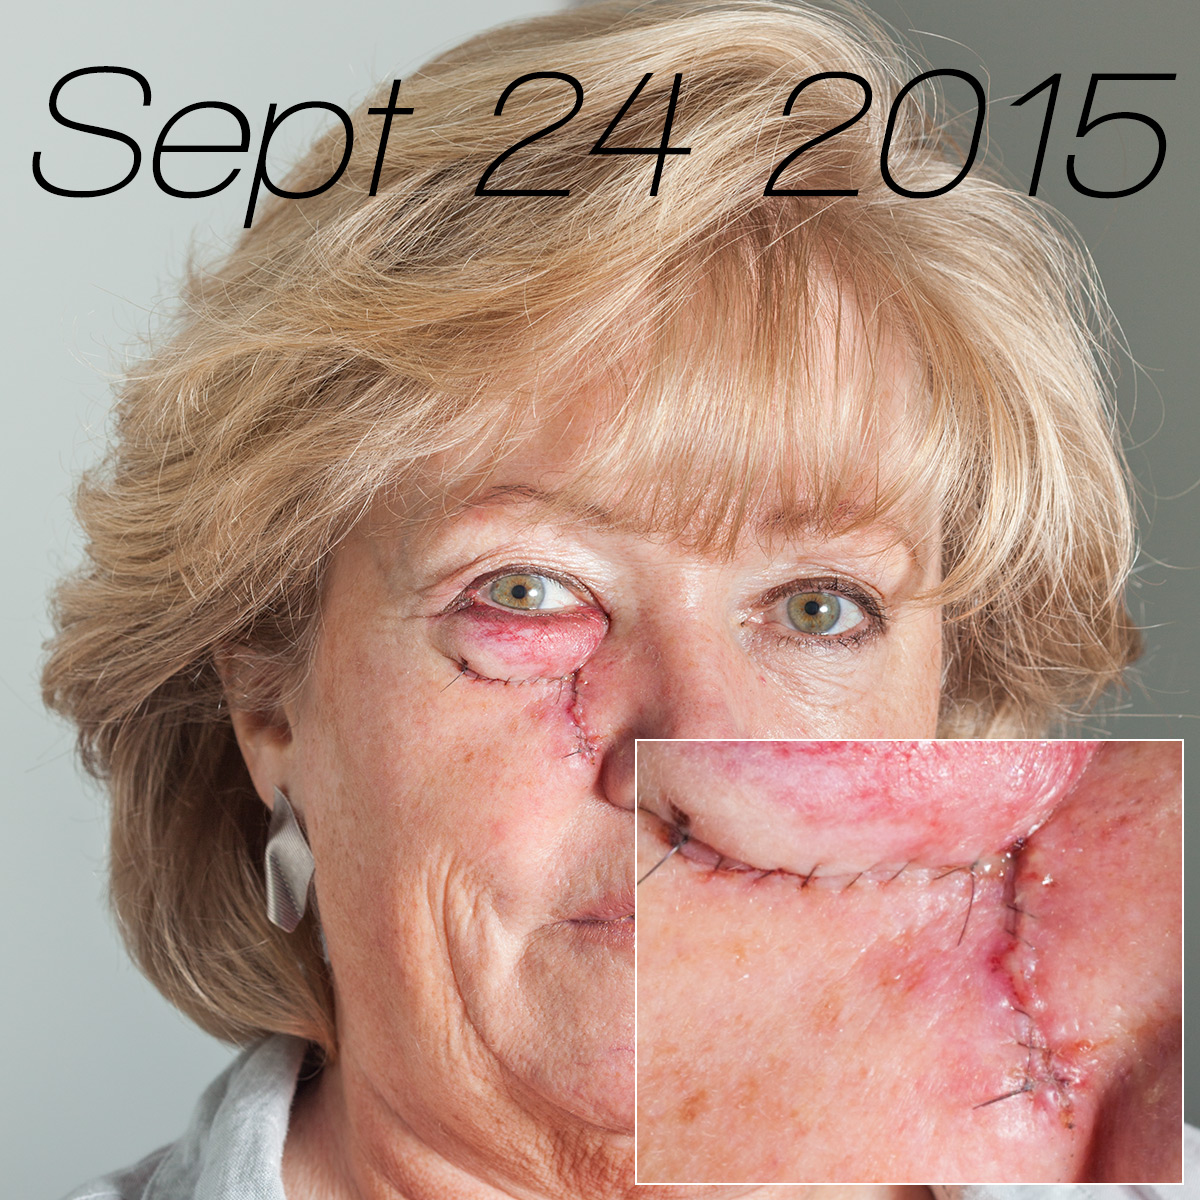 Stitches following Mohs surgery September 23 2015